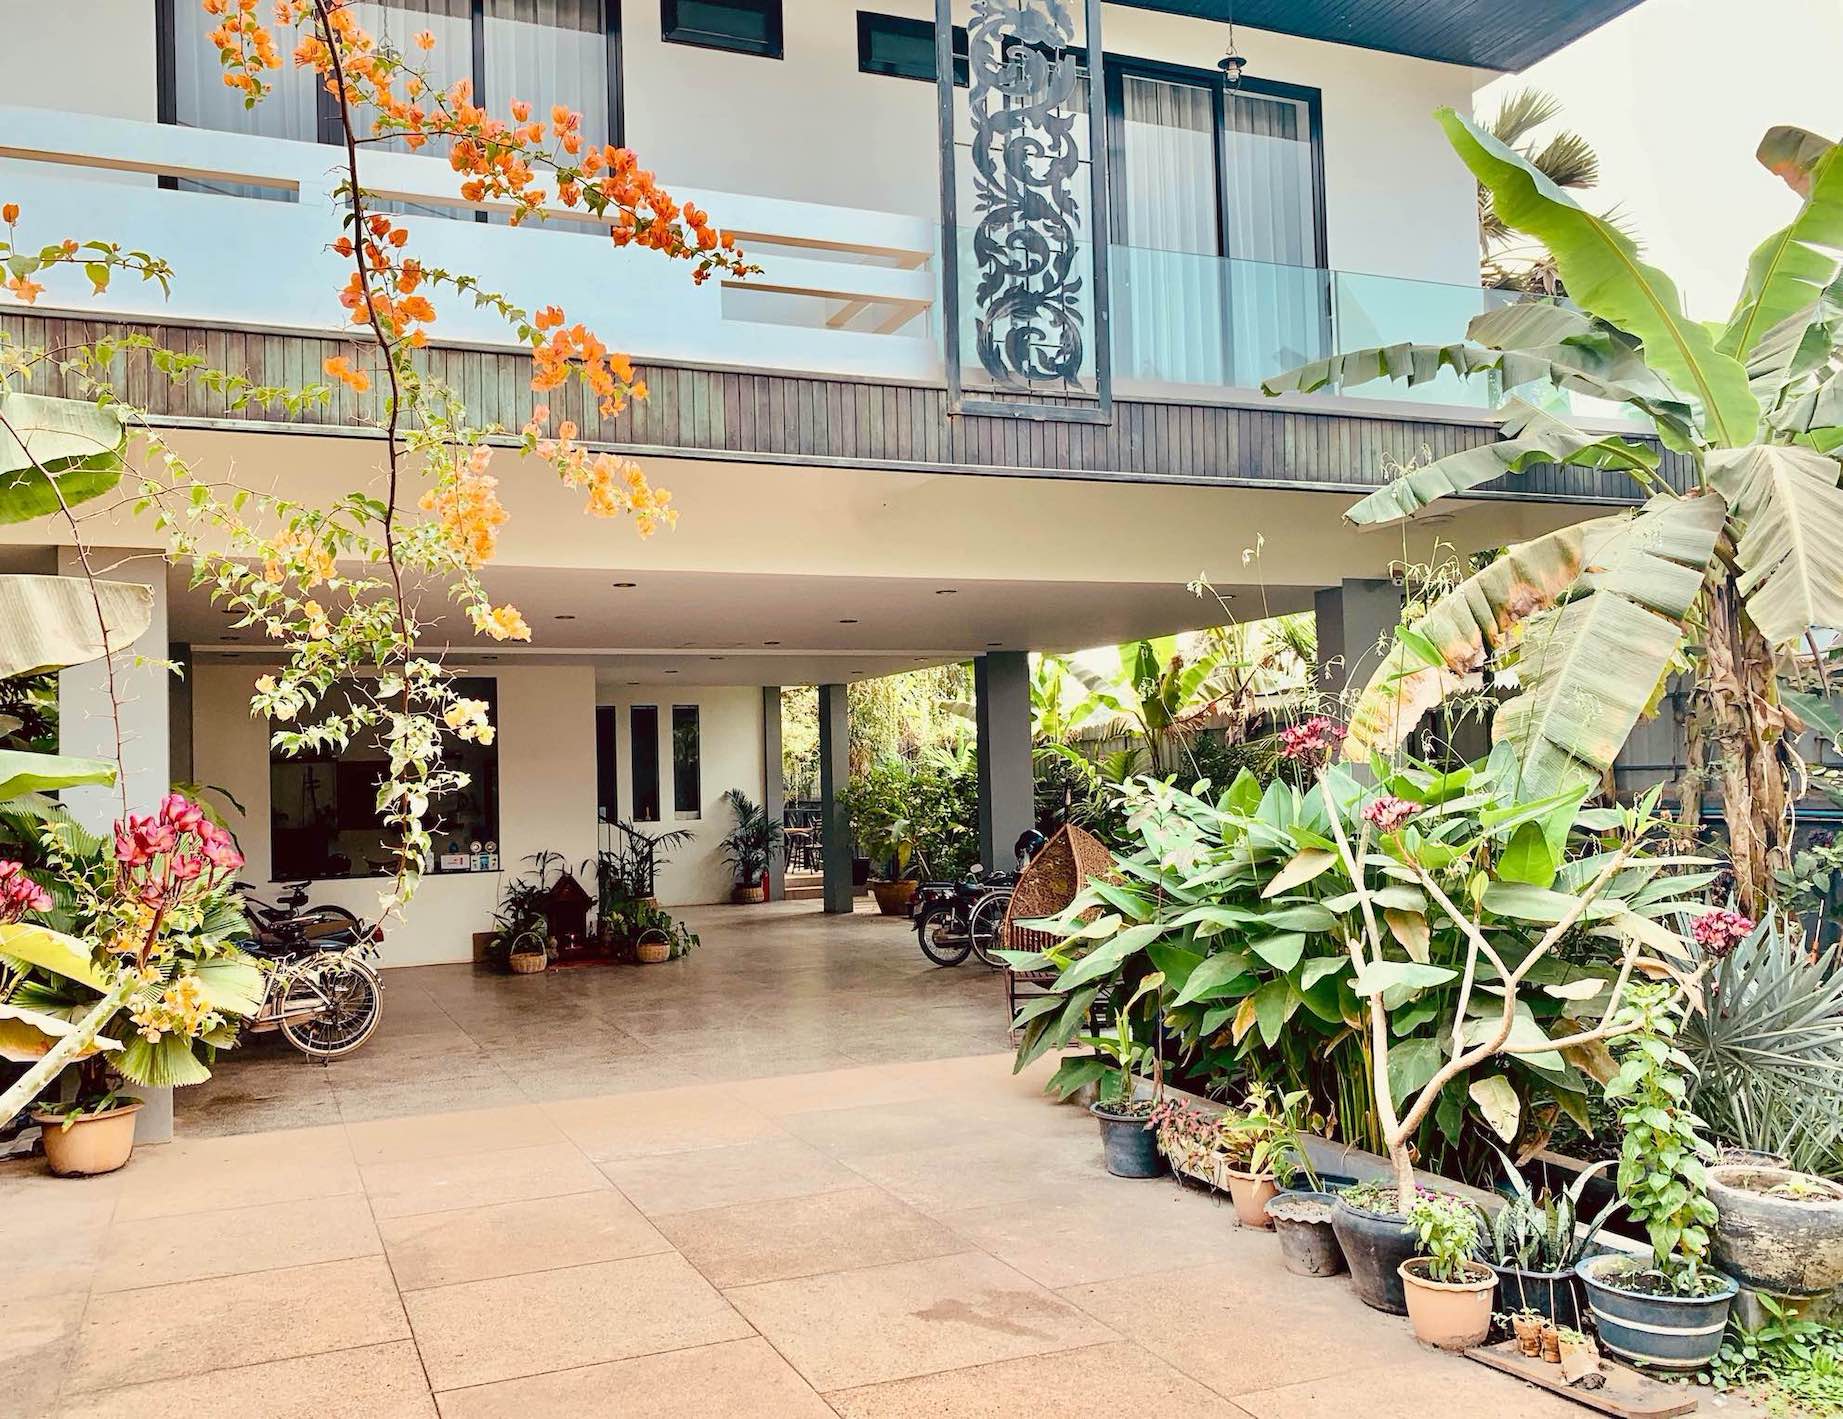 The courtyard garden at Foster Apartments in Siem Reap